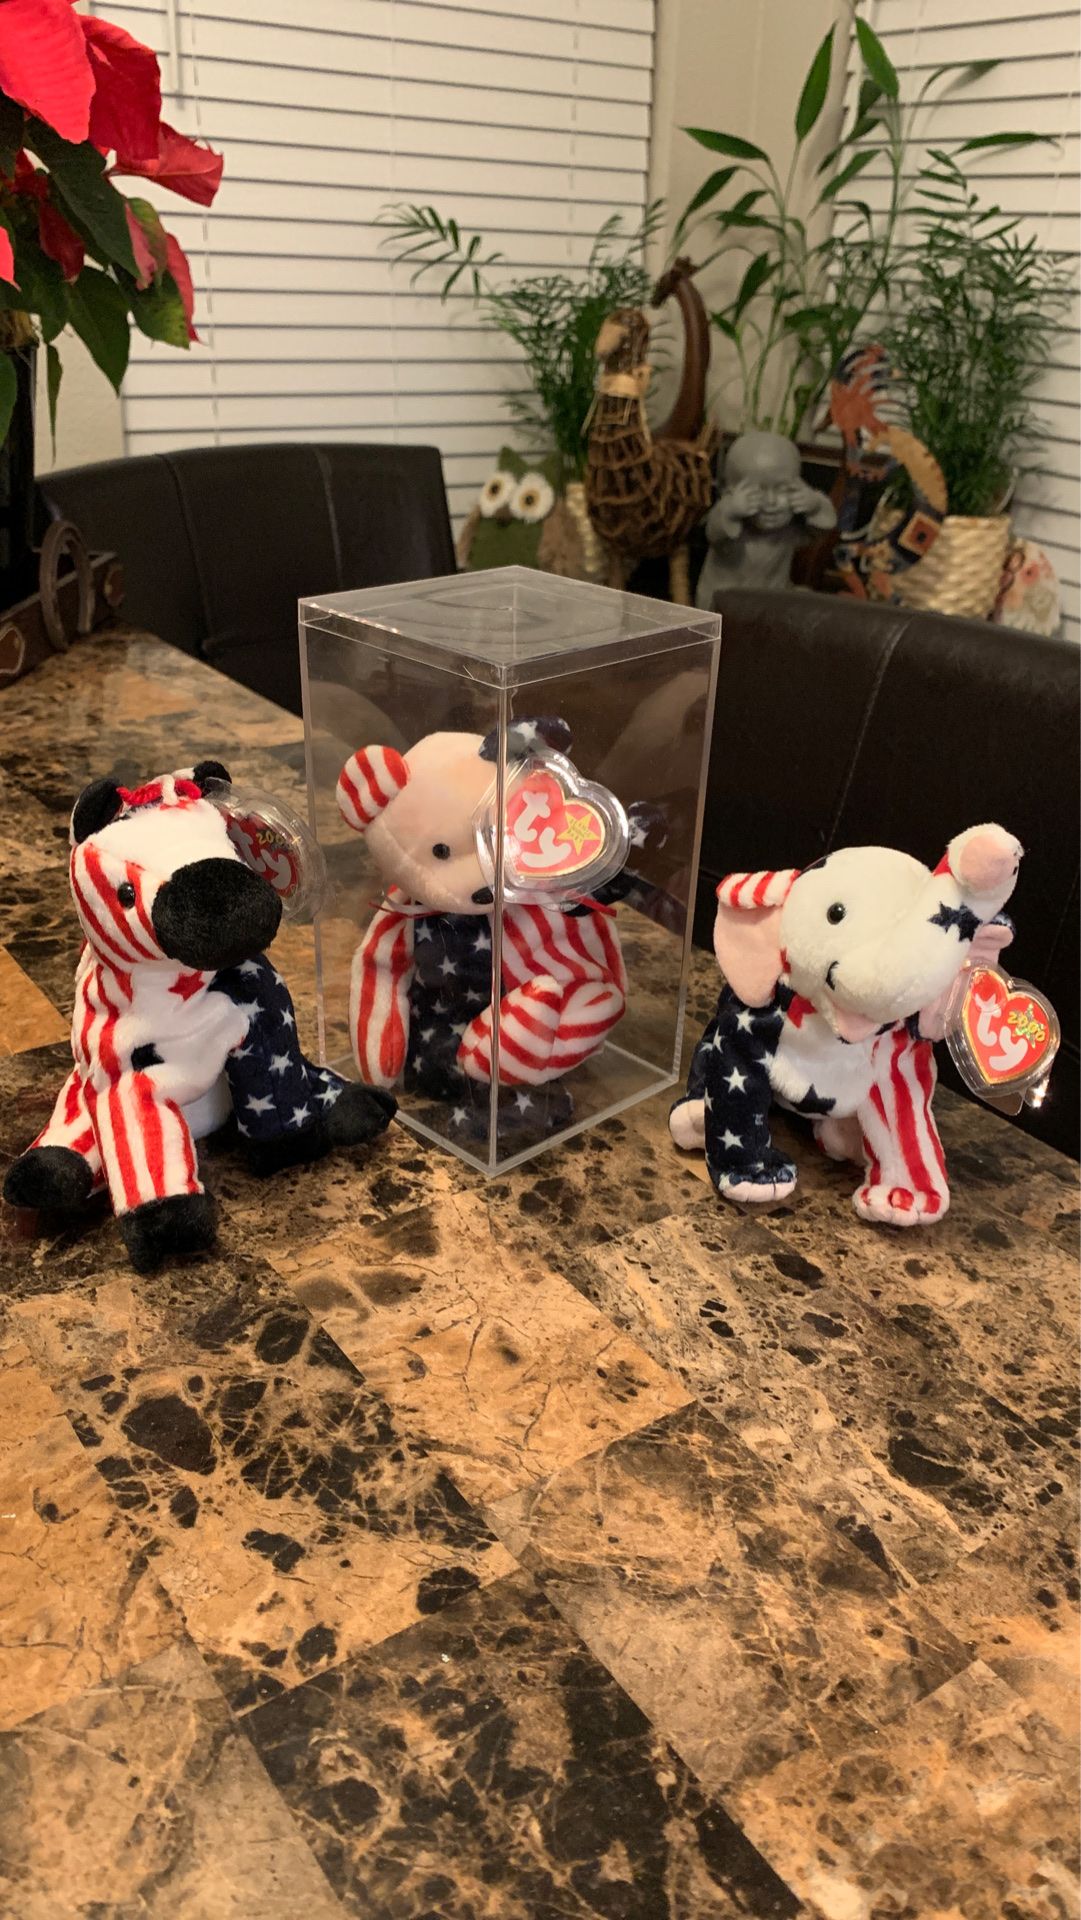 The “American” Collection TY Beanie Babies